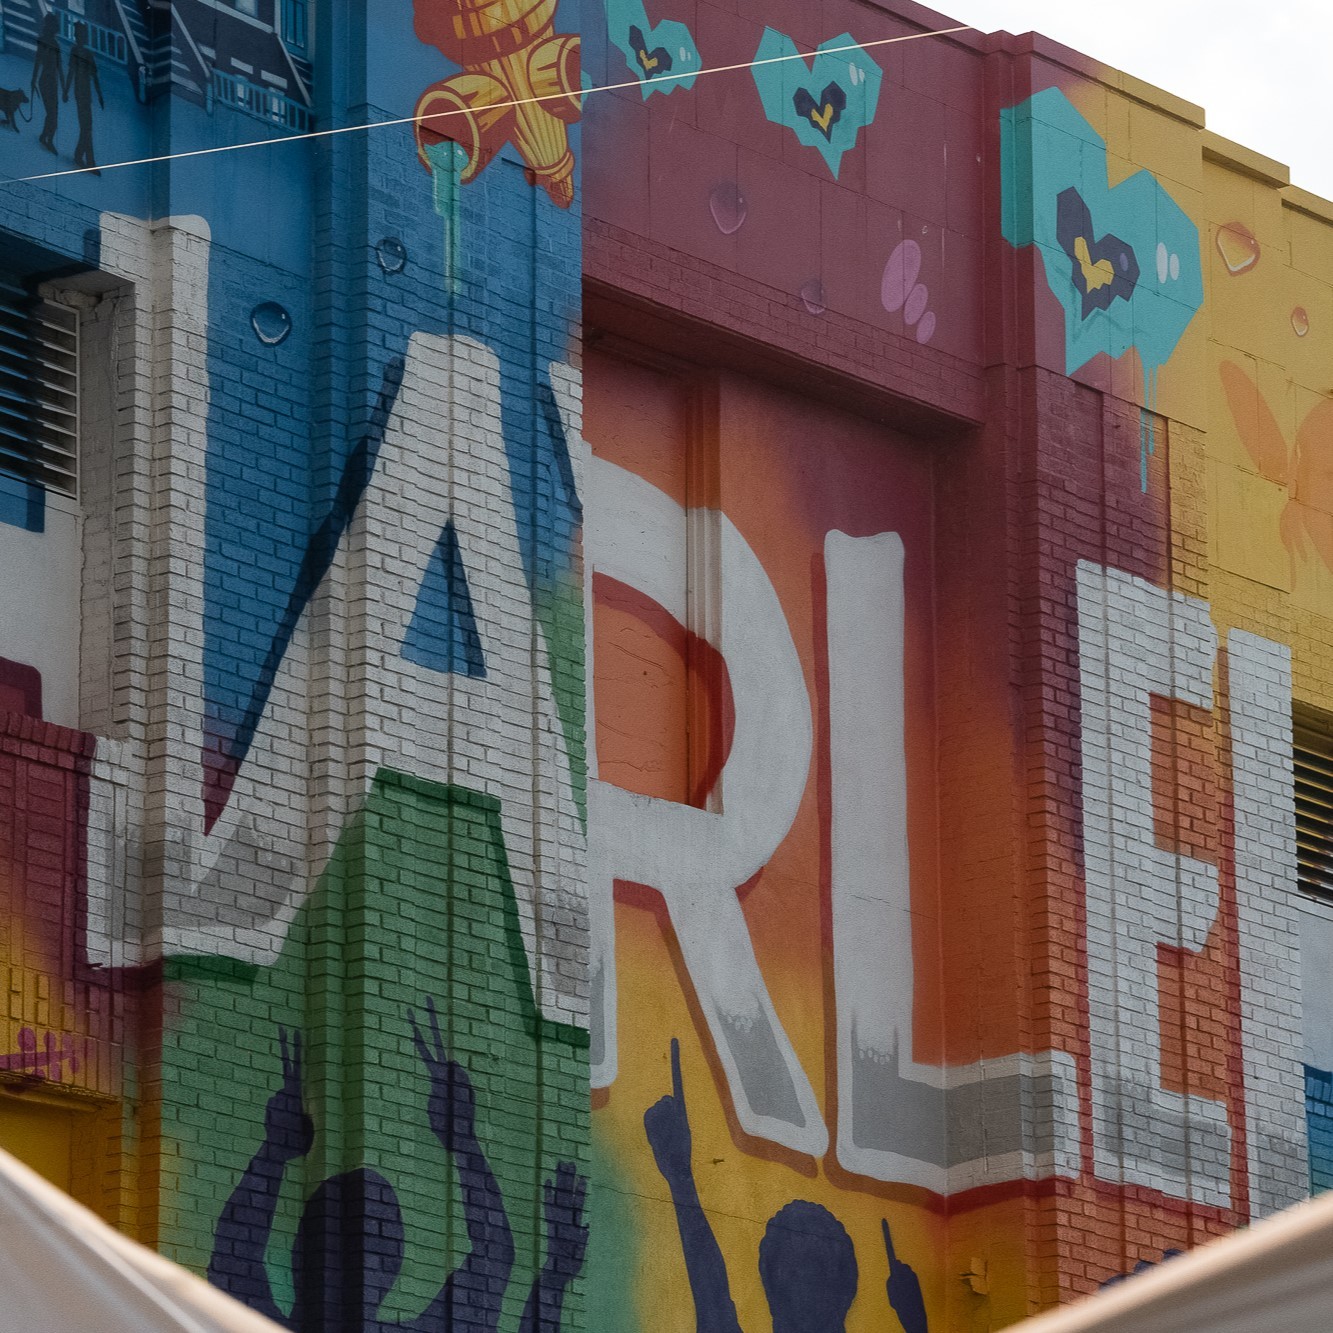 Colorful Harlem mural on side of a building. Credit: Cole Giordano/Columbia University